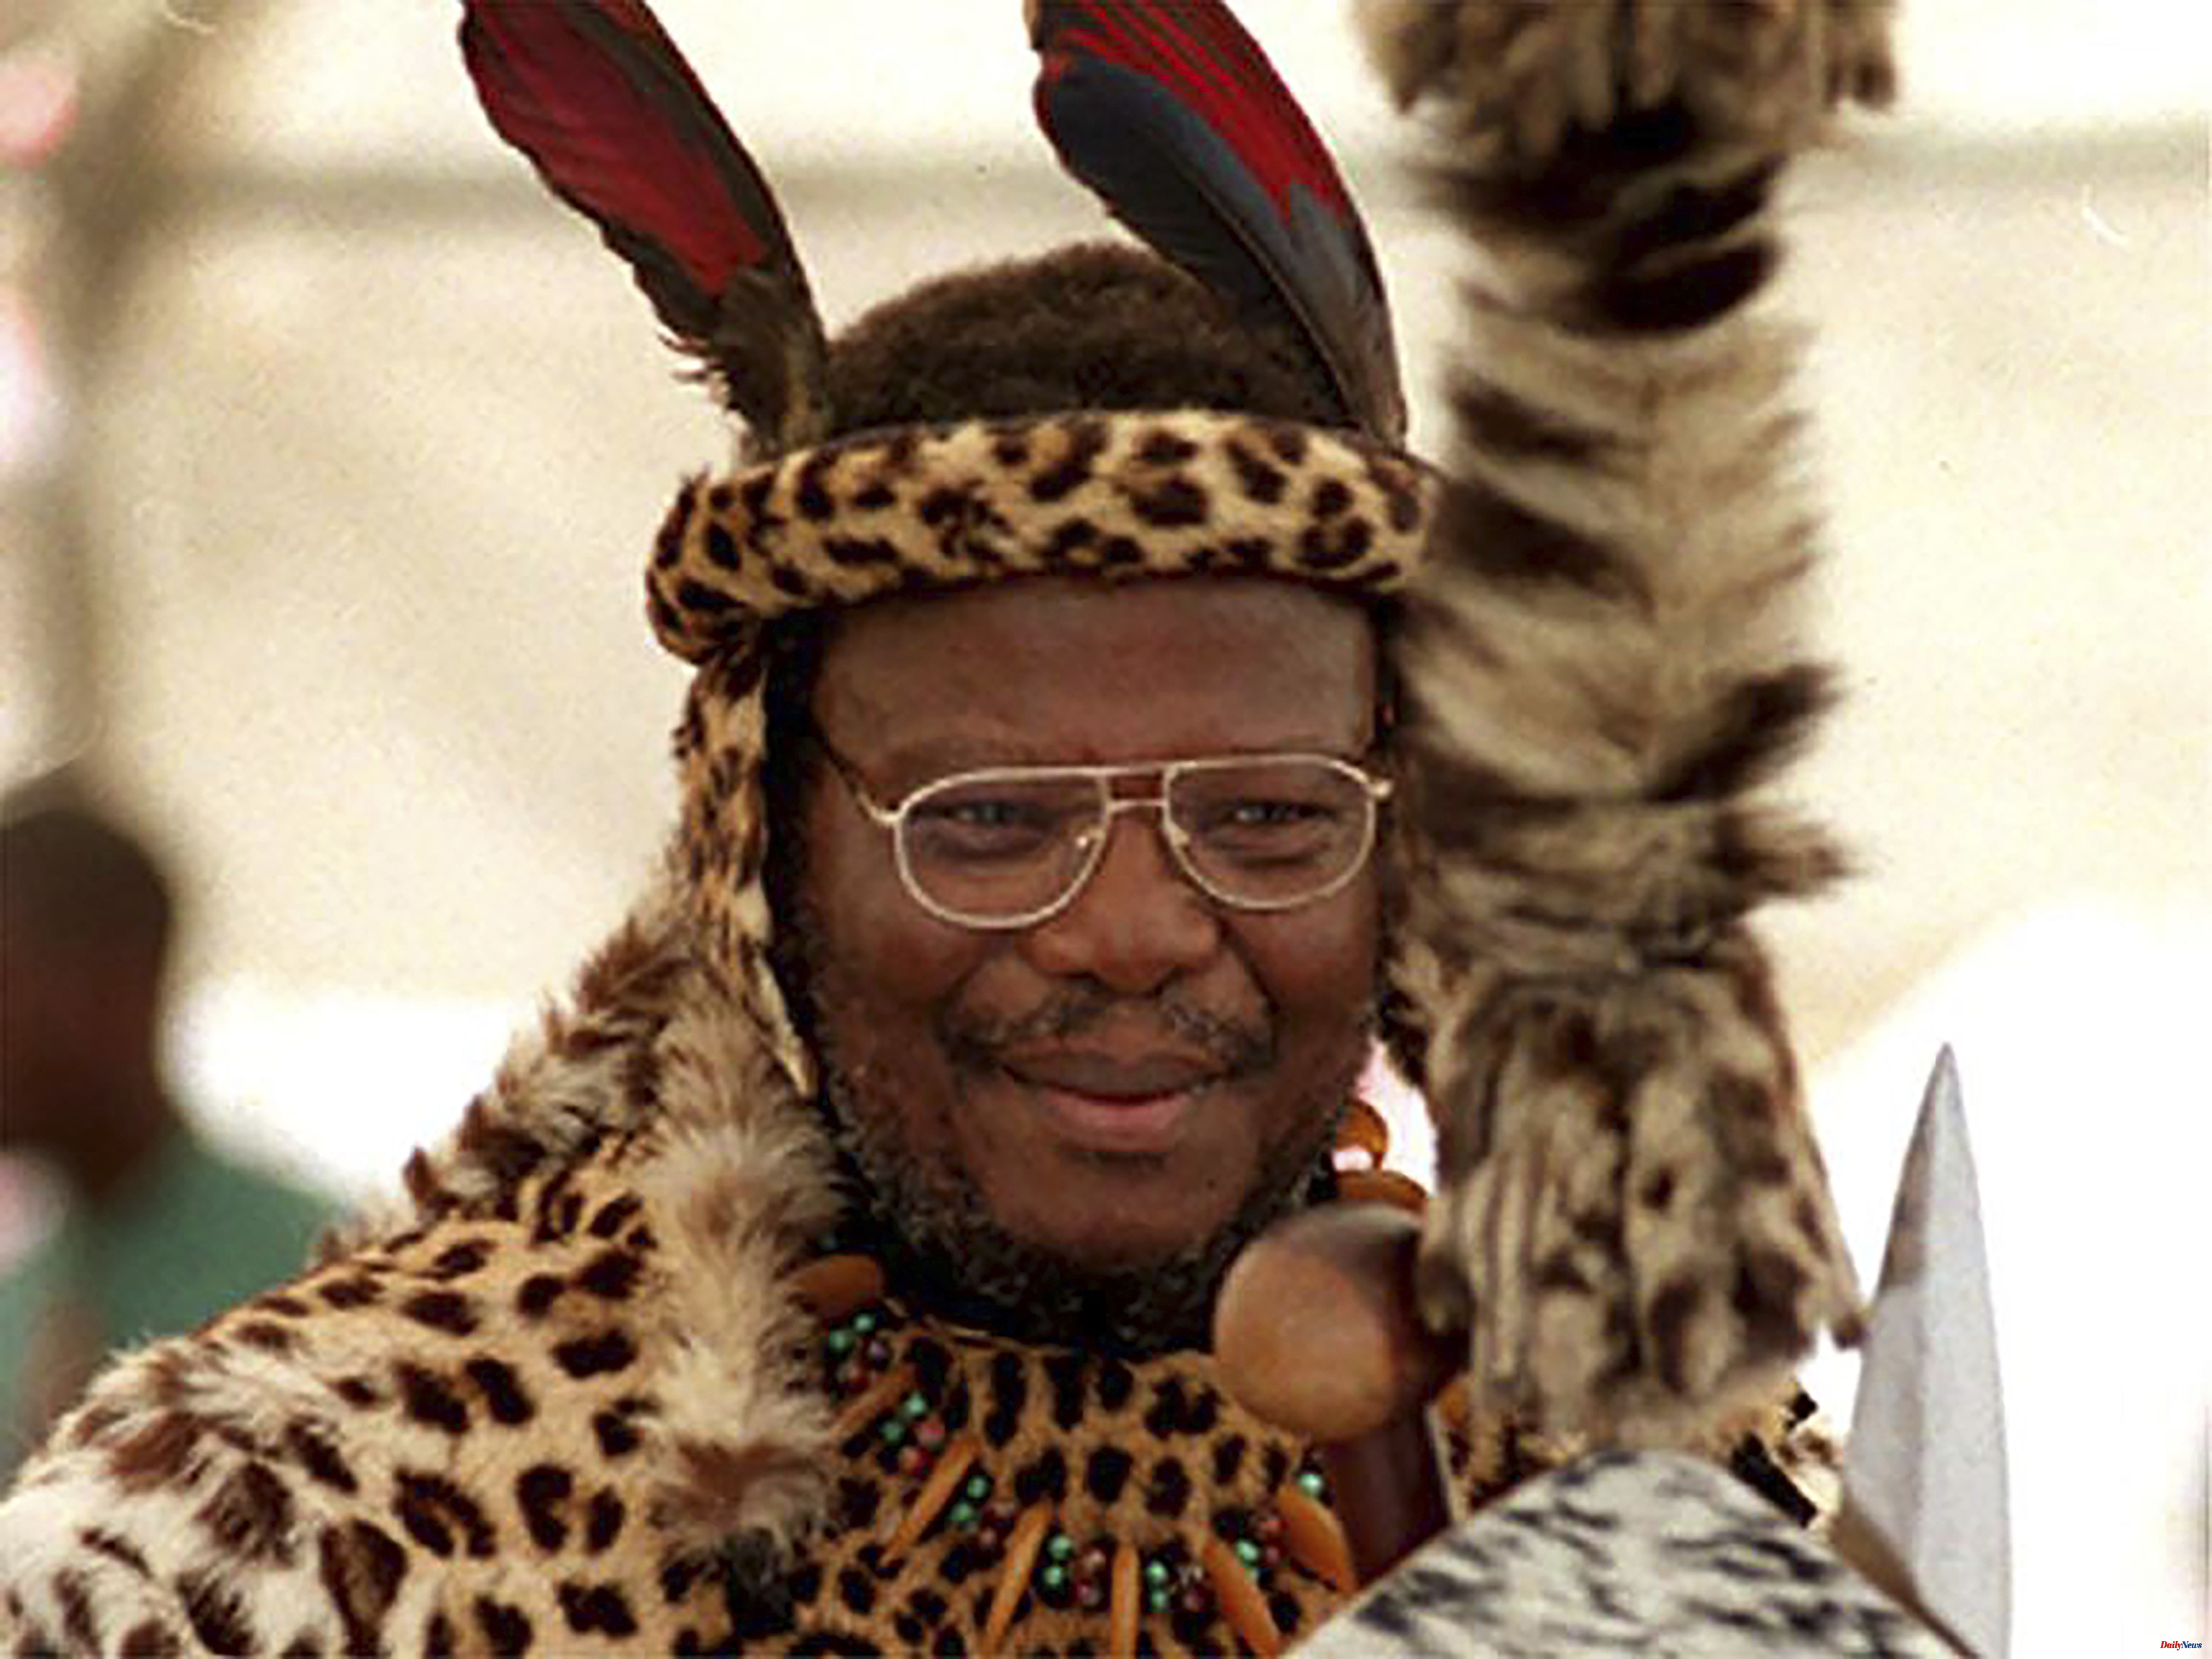 Africa Mangosuthu Buthelezi, the controversial prime minister of the Zulu kingdom in South Africa, dies